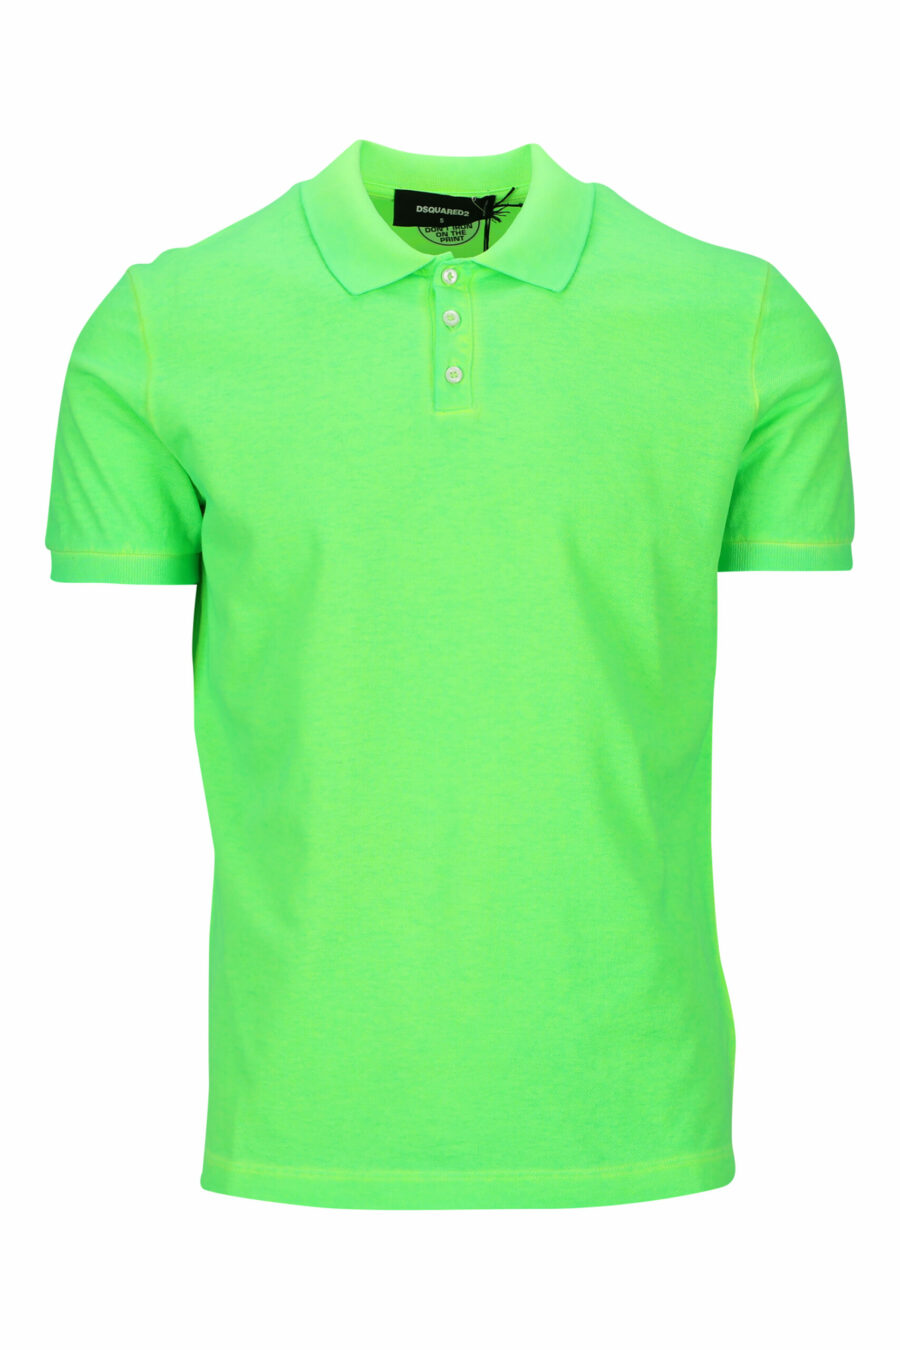 Neon green "tennis fit" polo shirt with "icon" logo on the back - 8054148400781 scaled